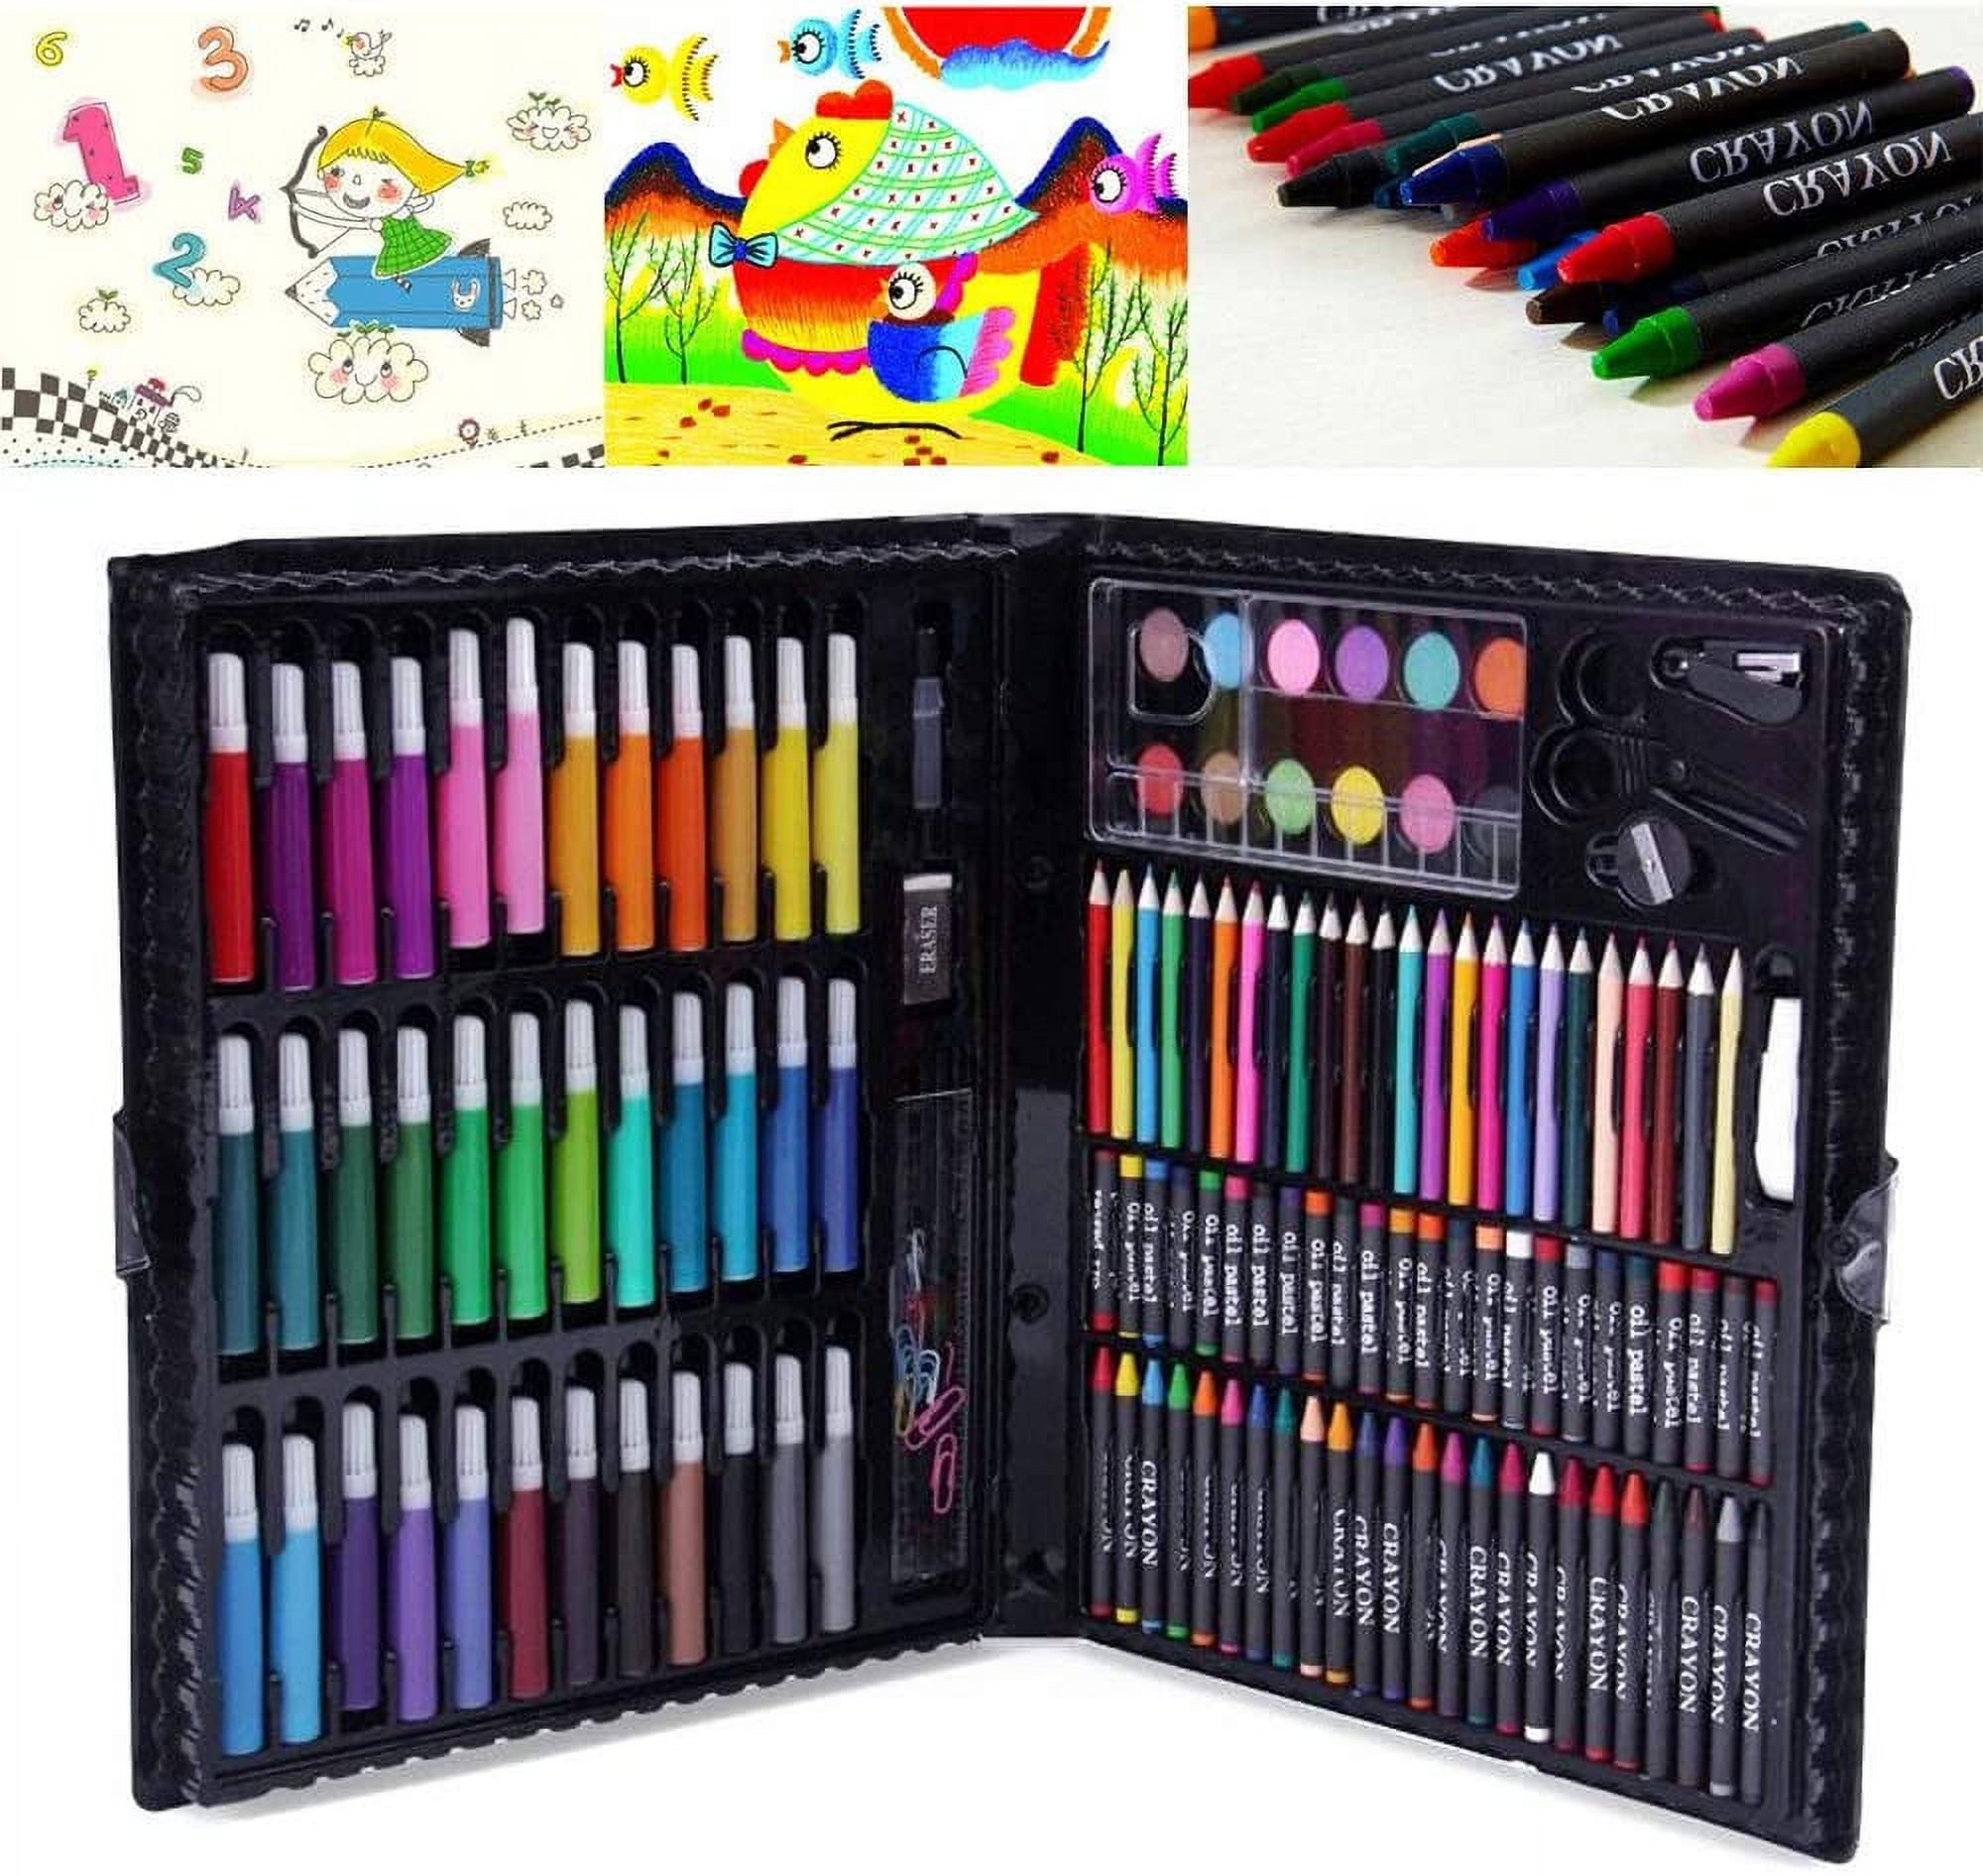 150-Piece Art Set for Kids Teens and Adults Includes Drawing and